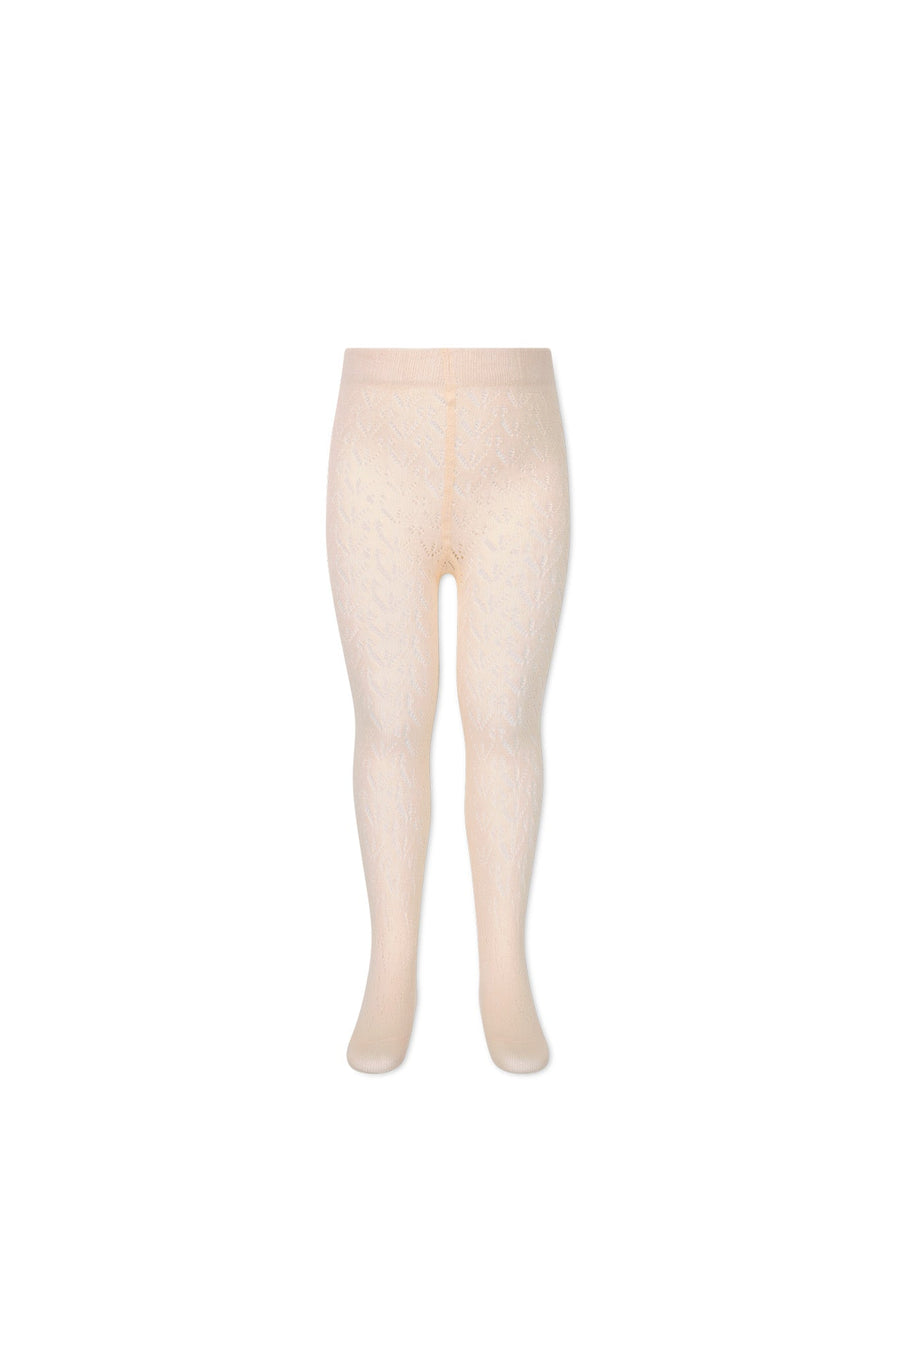 Lillian Tight - Boto Pink Childrens Tight from Jamie Kay USA